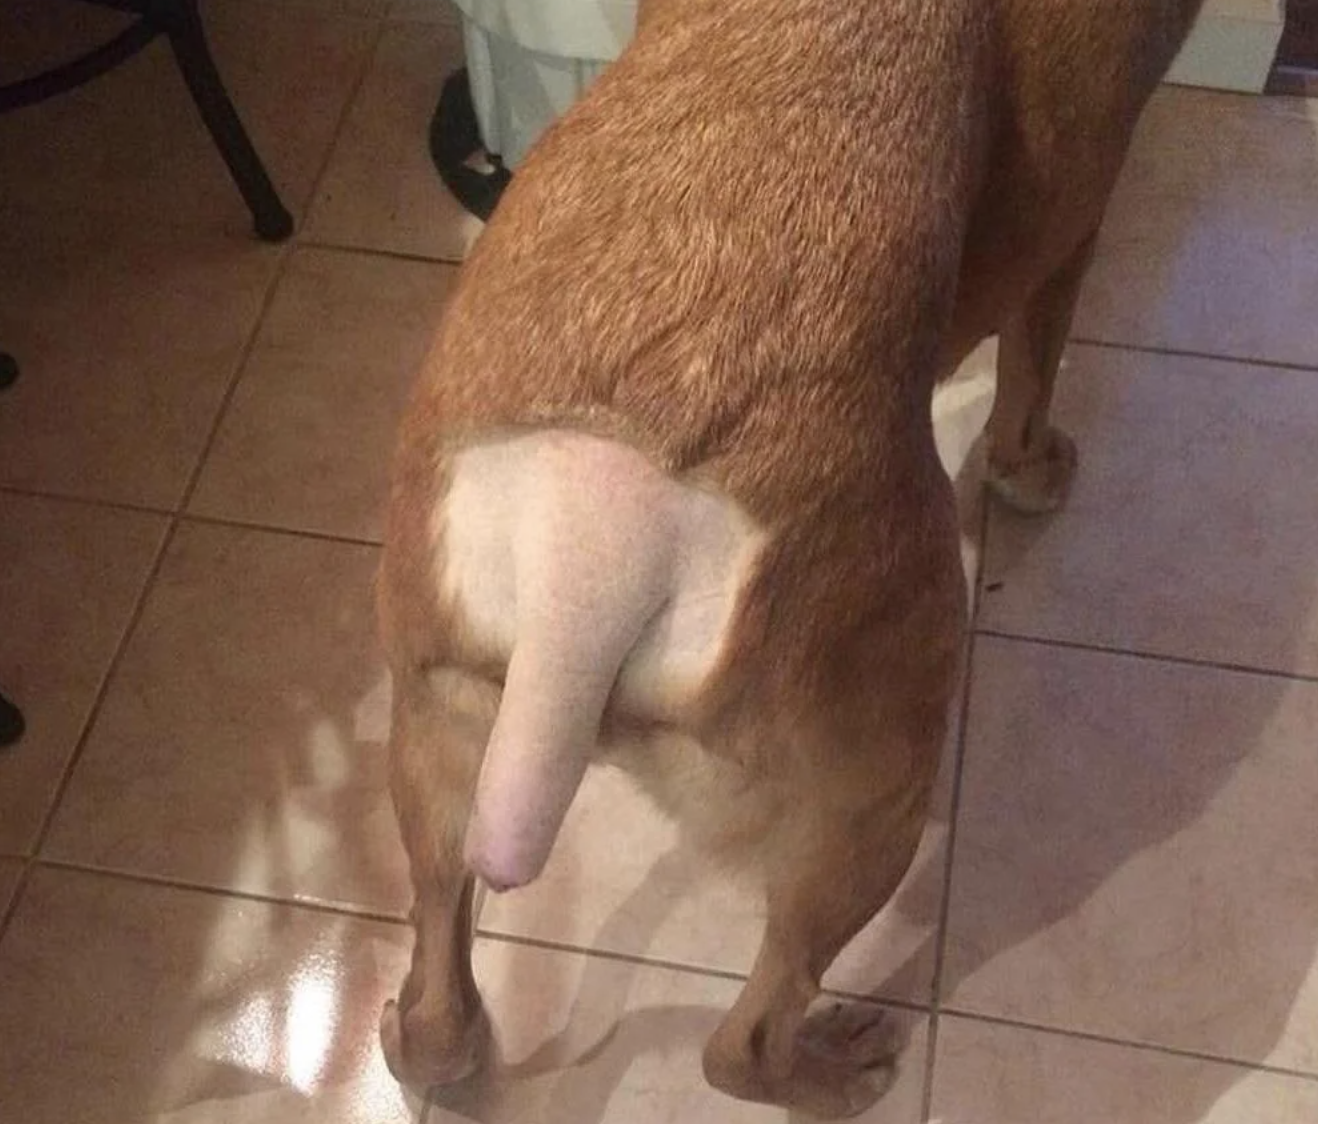 A dog&#x27;s hindquarters that have been shaved